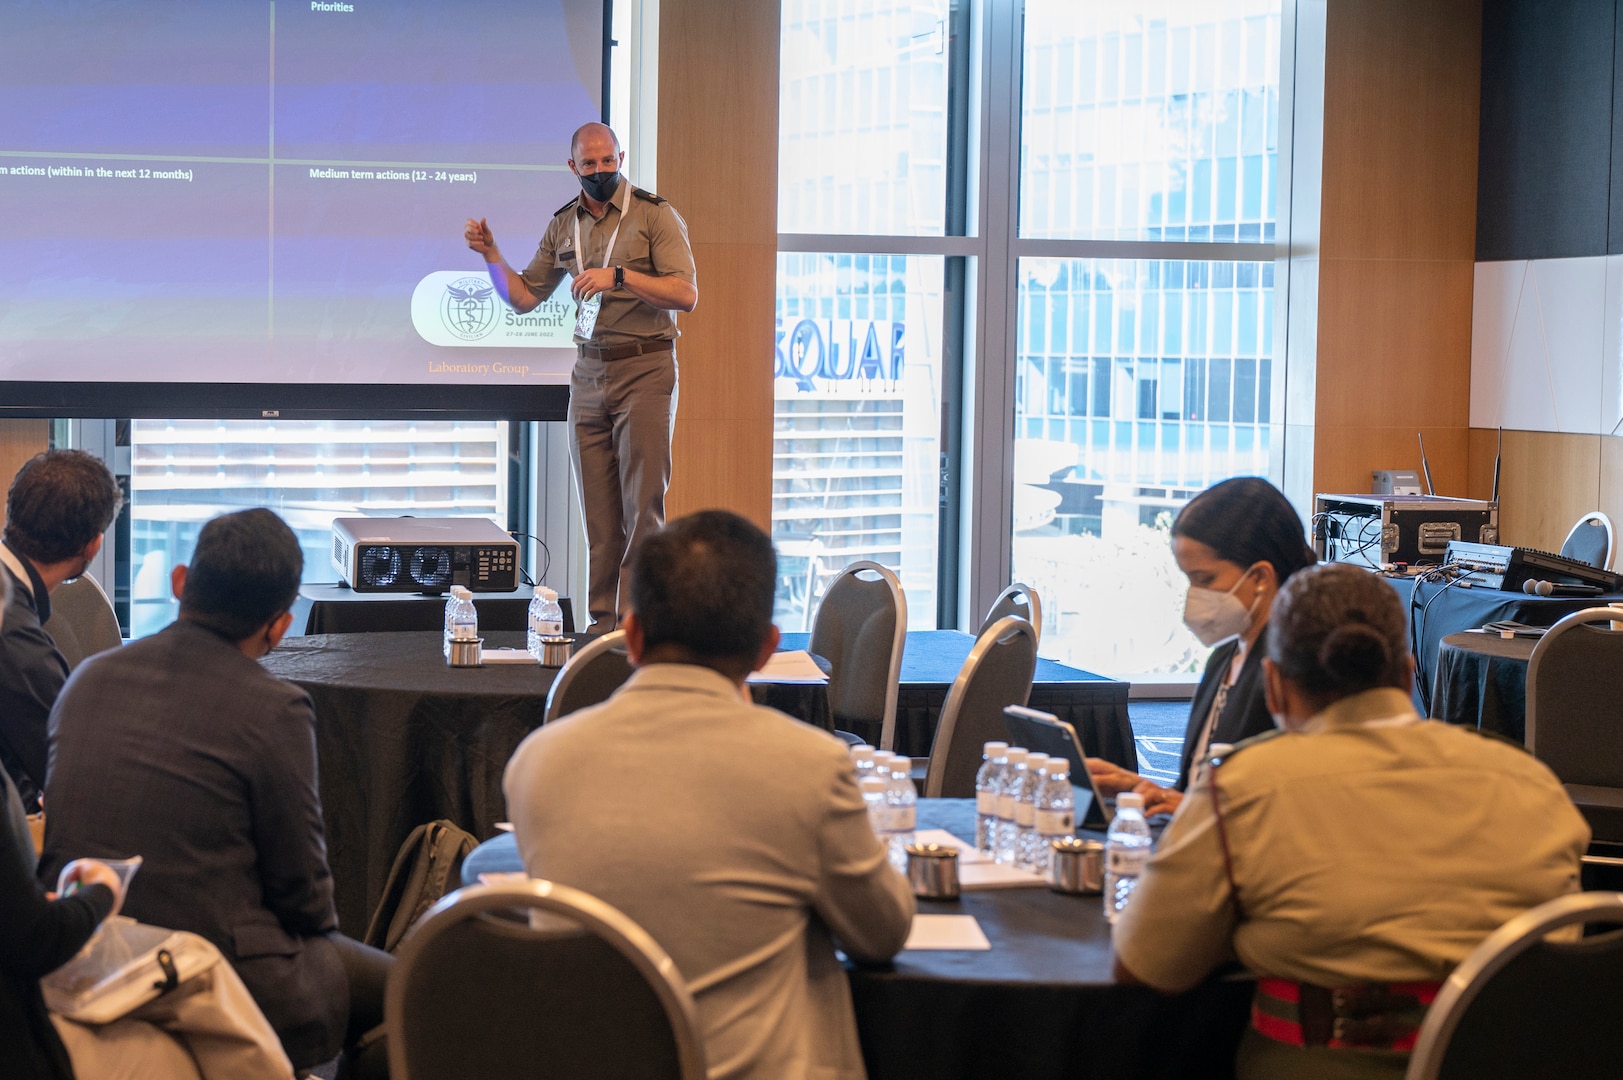 Delegates from multiple nations discuss analysis tactics during the second Military-Civilian Health Security Summit June 28, 2022, in Singapore. The summit, held June 27-28, focused on regional approaches to global health security through interagency cooperation with allies and partners.